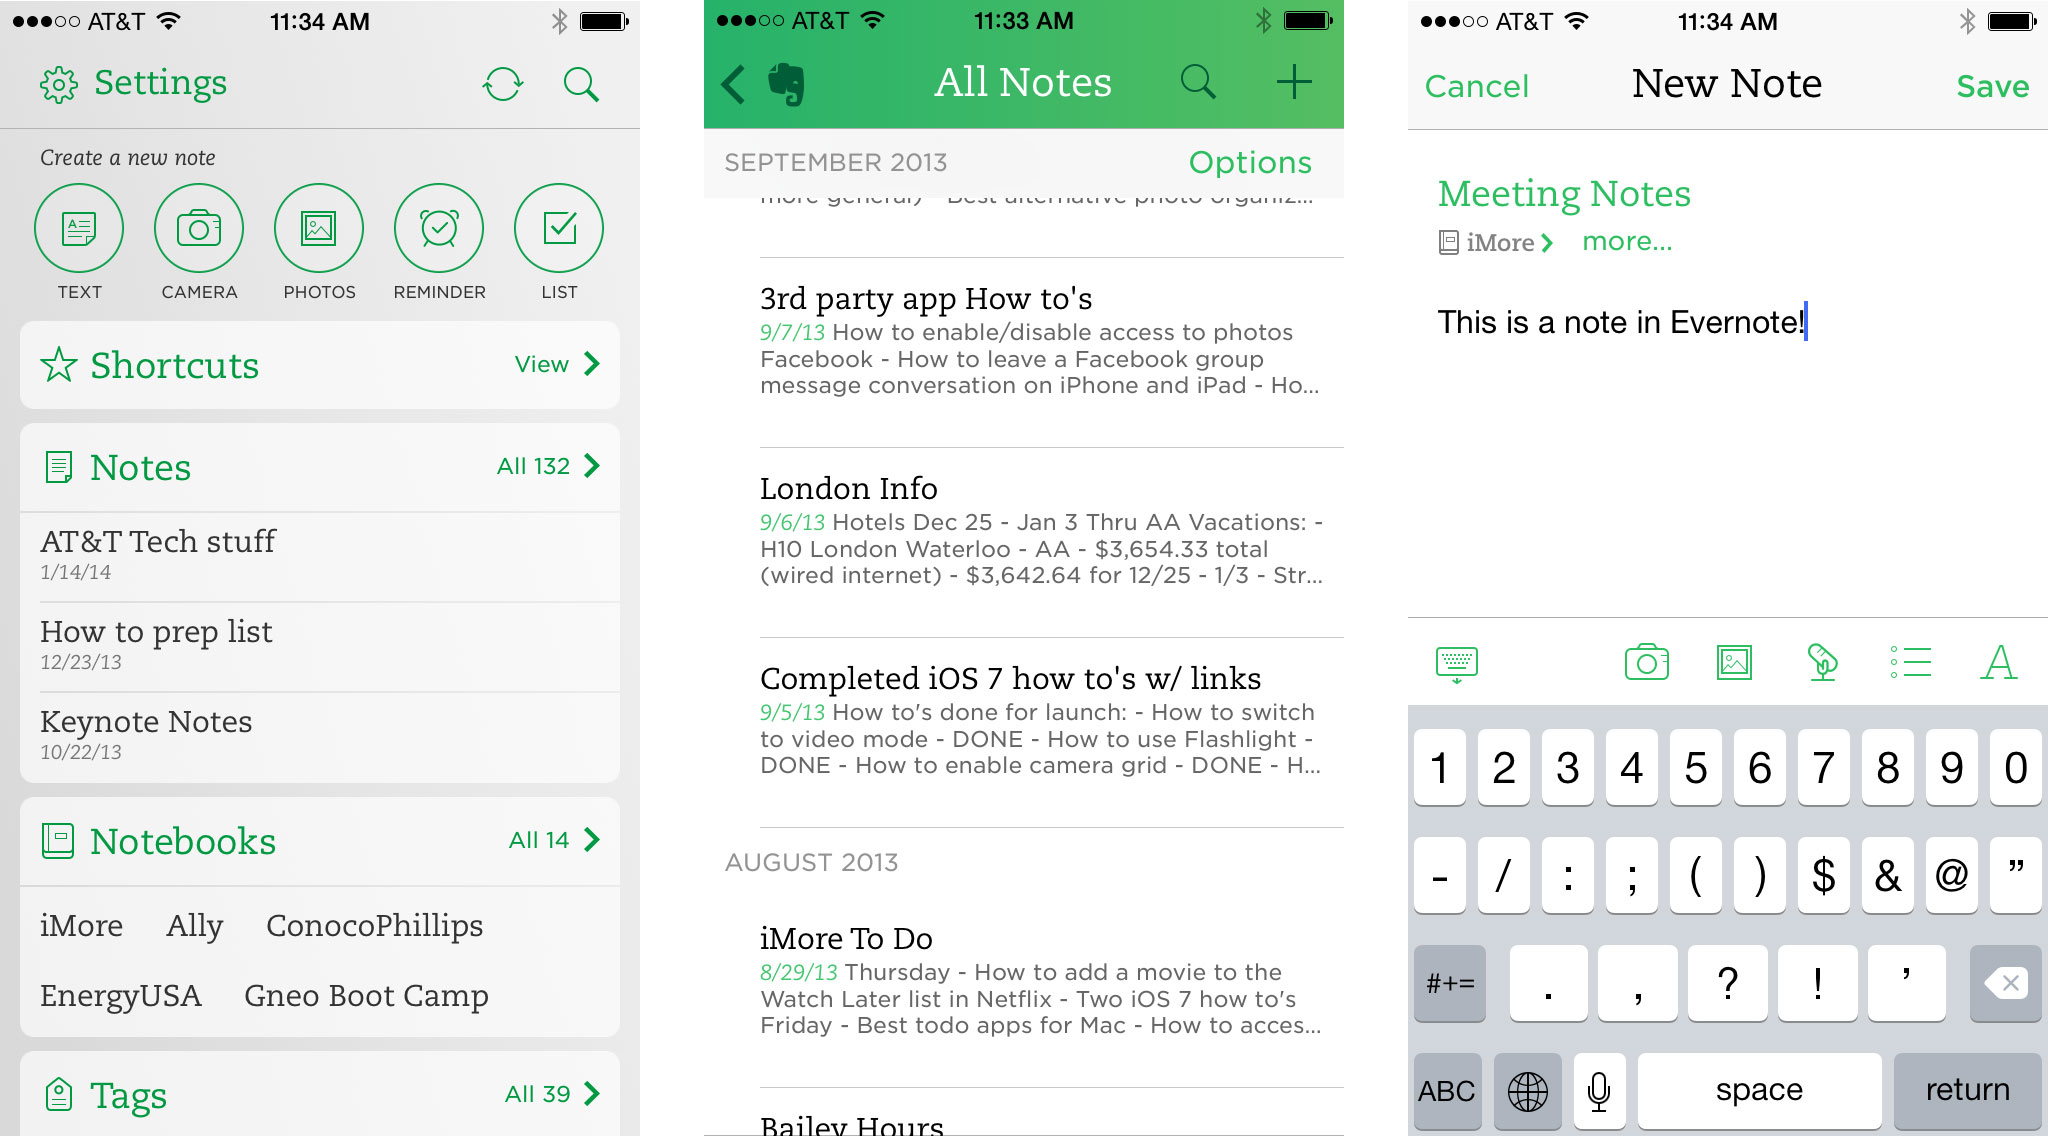 Best apps for accountants and CPAs: Evernote